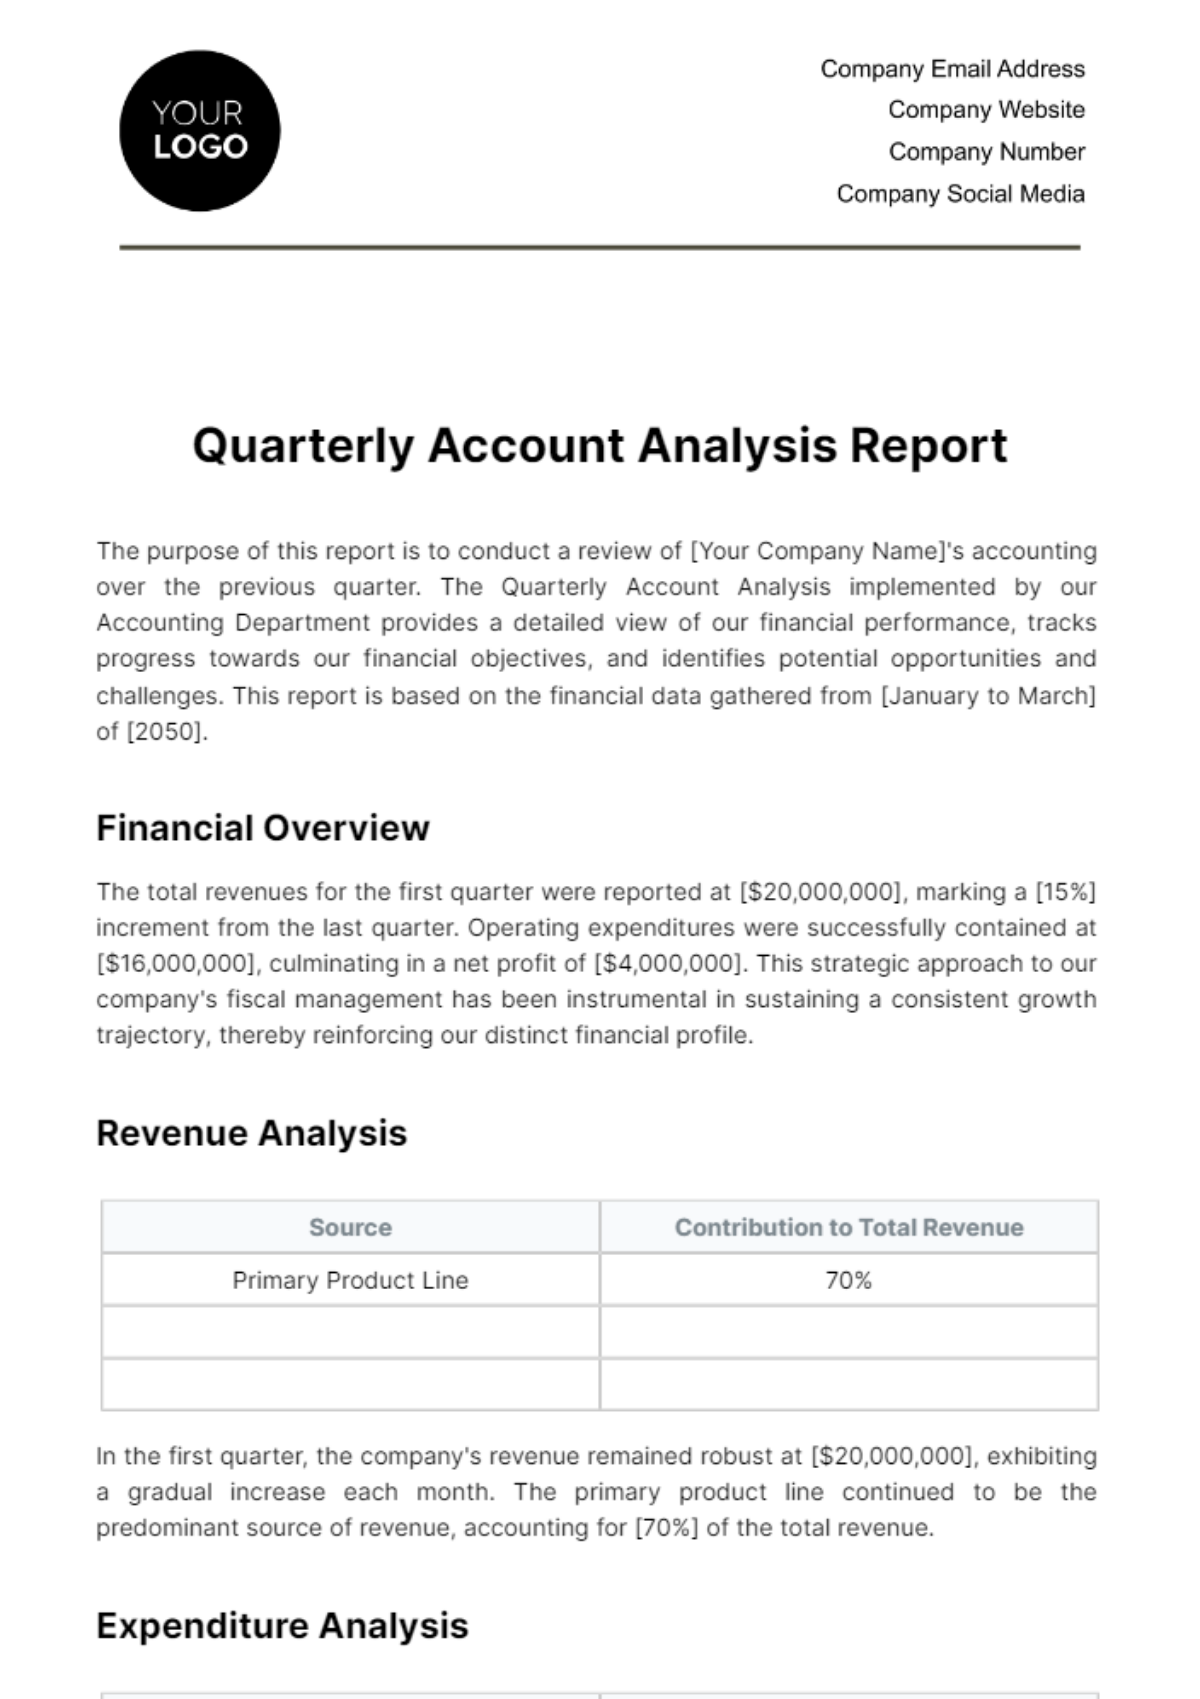 Quarterly Account Analysis Report Template